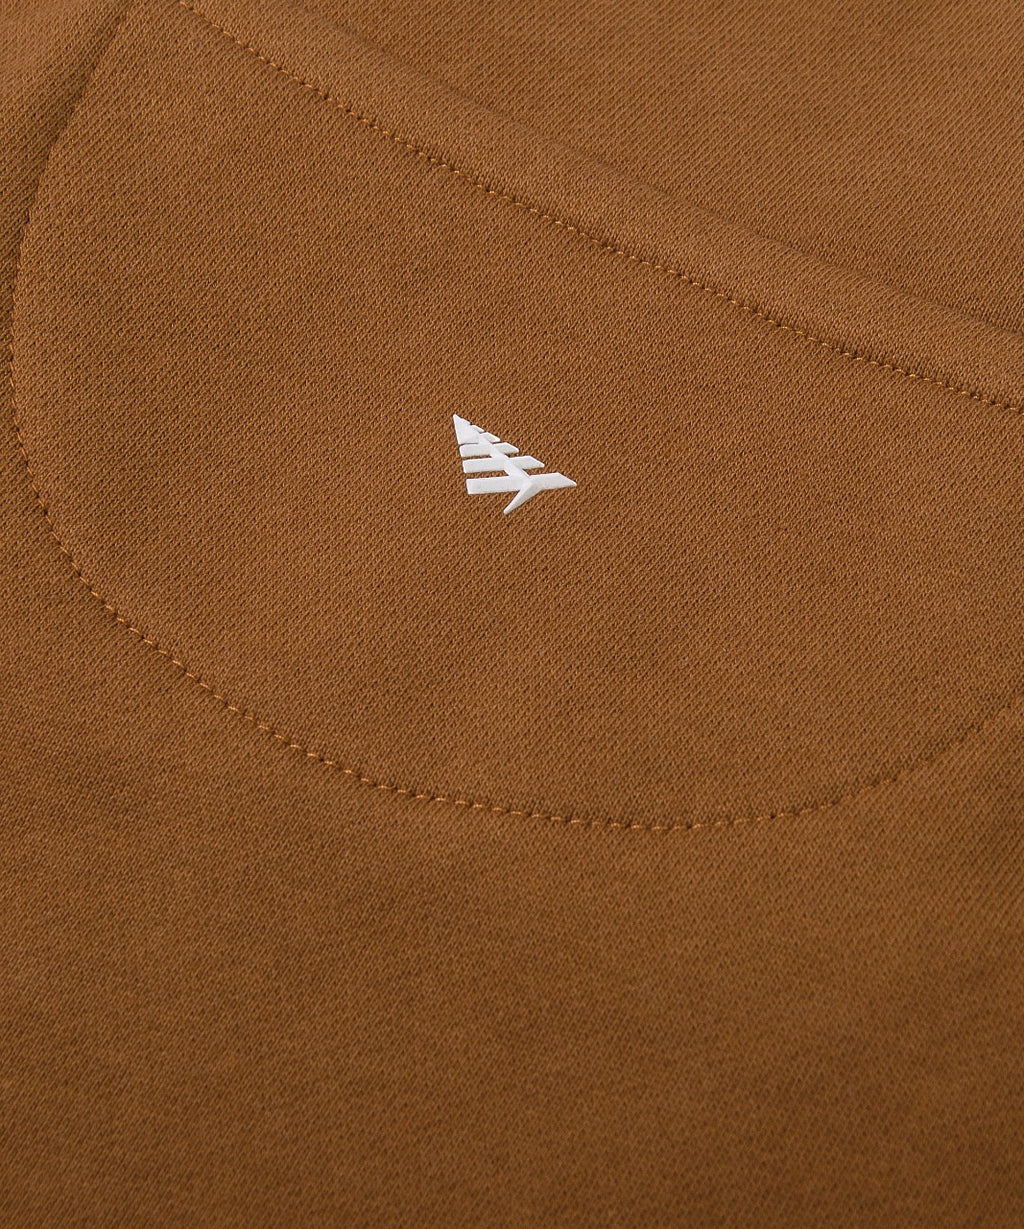  High-density silicone Plane icon centered on half moon stitch at back of Paper Planes Open Hem Half Zip Sweatshirt, color Rubber.